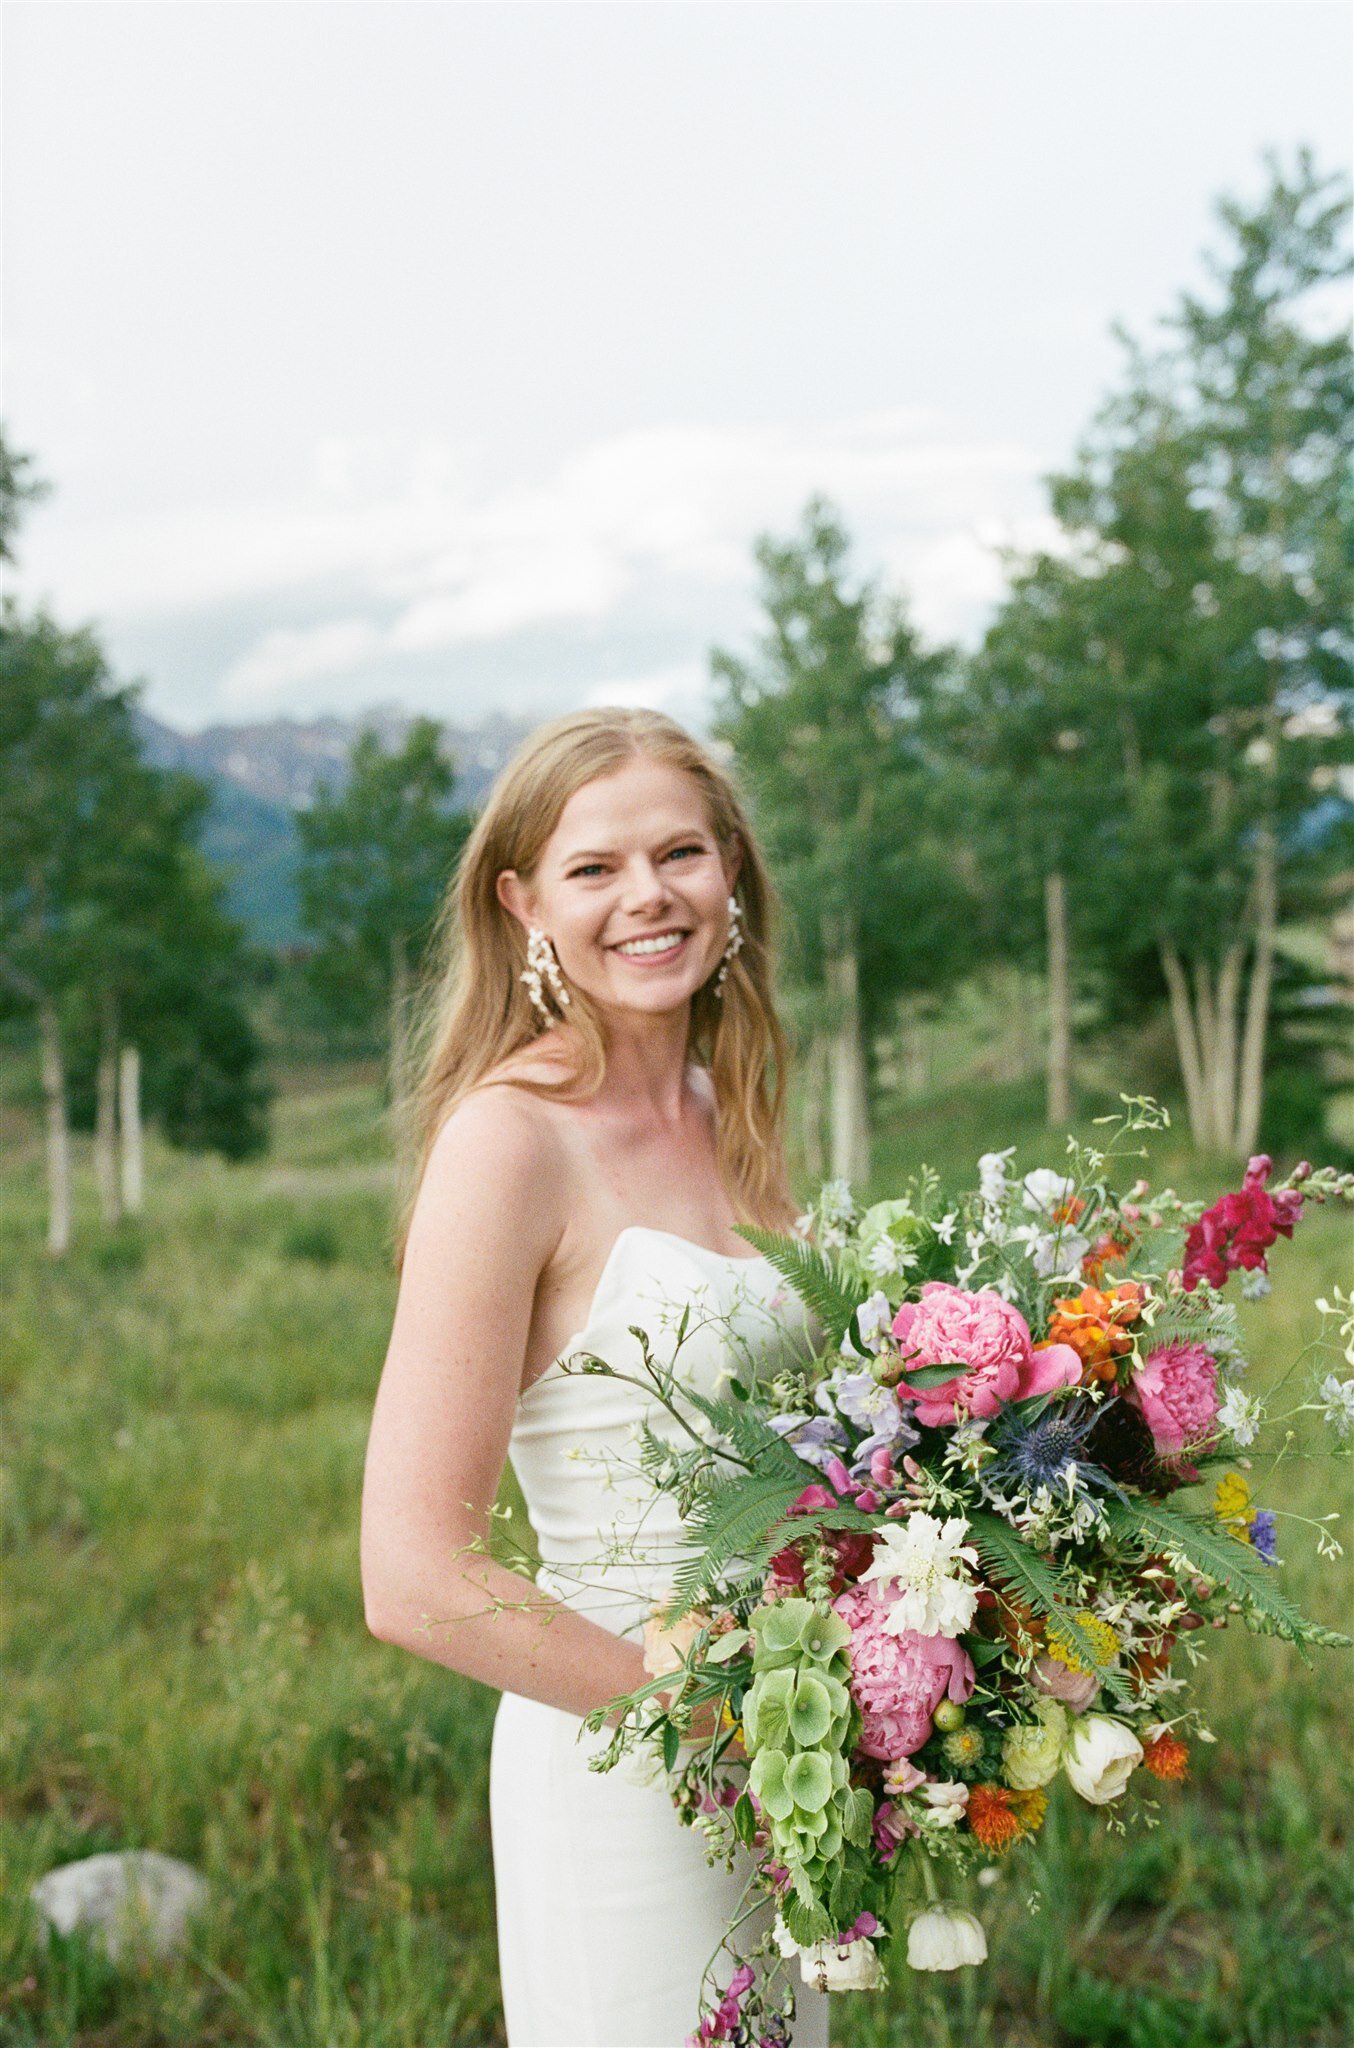  A bride in Telluride, Colorado smiling holding a large floral bridal bouquet and wearing ROSE by The Label 